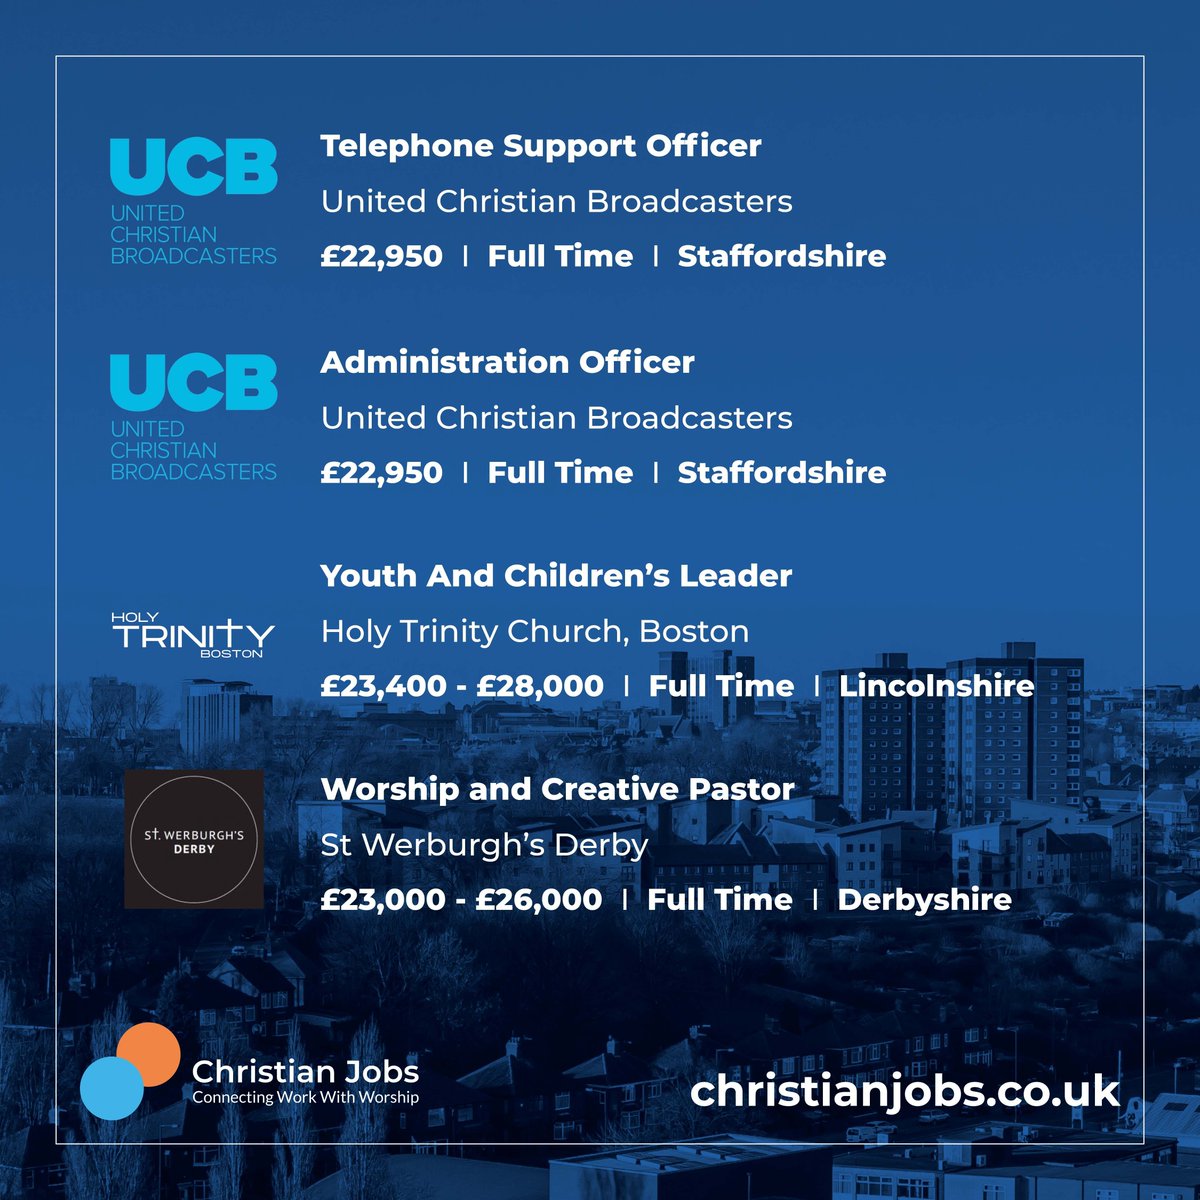 Discover your calling in the Midlands! Explore Christian vacancies across various fields, from administration to youth work. Go to christianjobs.co.uk/jobs to learn more. #UKChristianJobs #ChristianOpportunities #Midlands #Stoke #Derby #Lincoln #MidlandsJobs